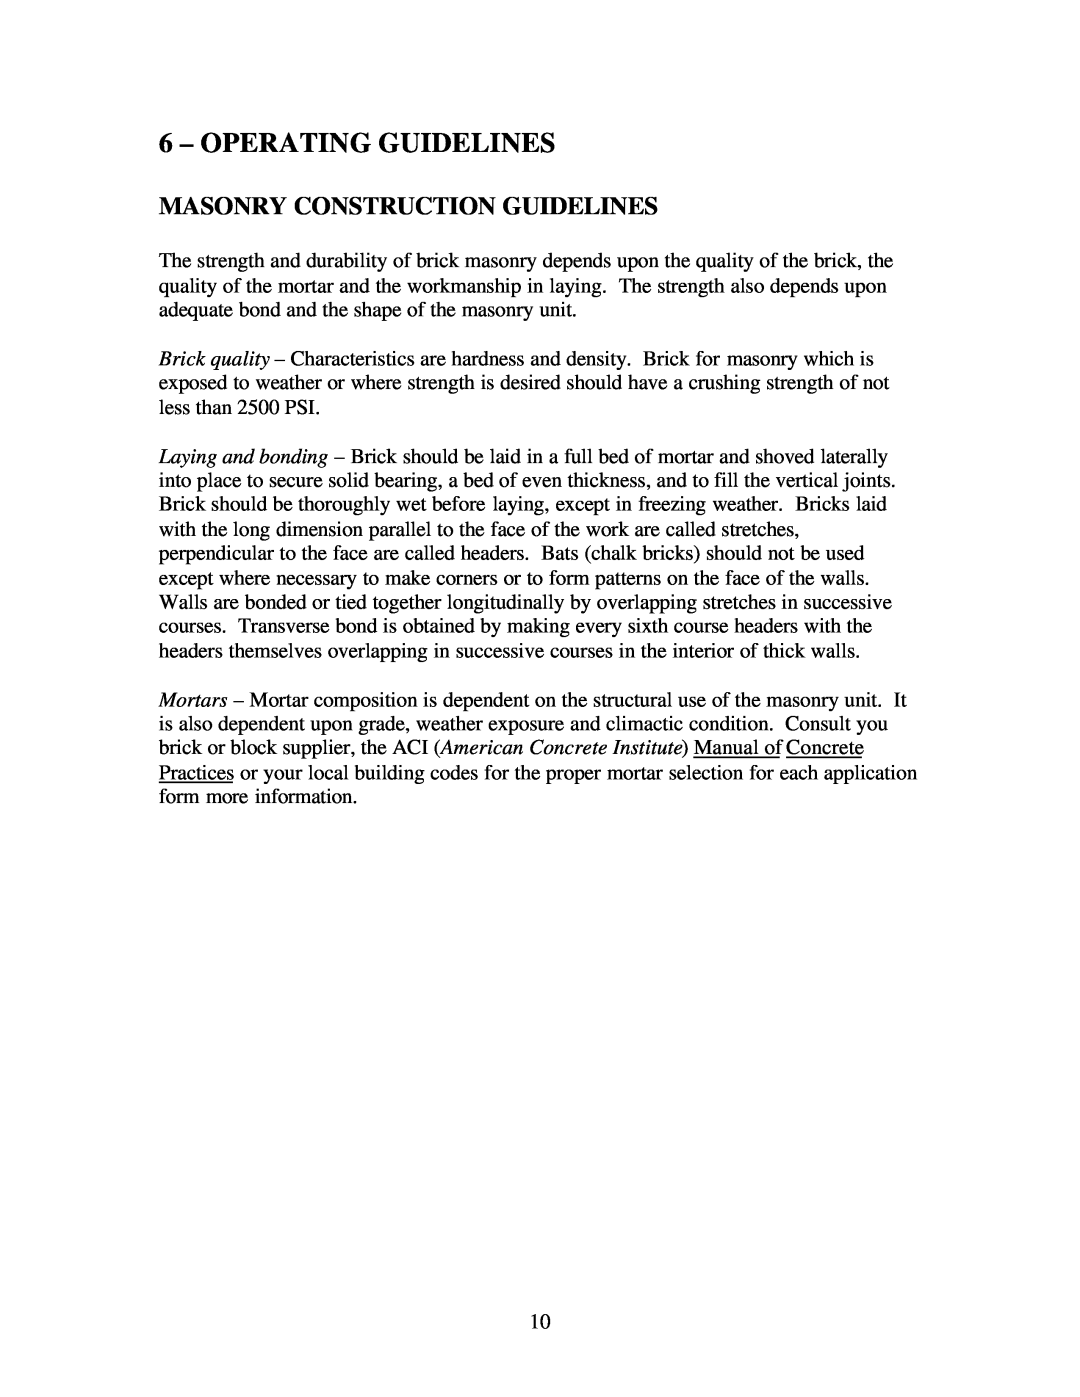 Gilson 1200MP manual Operating Guidelines, Masonry Construction Guidelines 